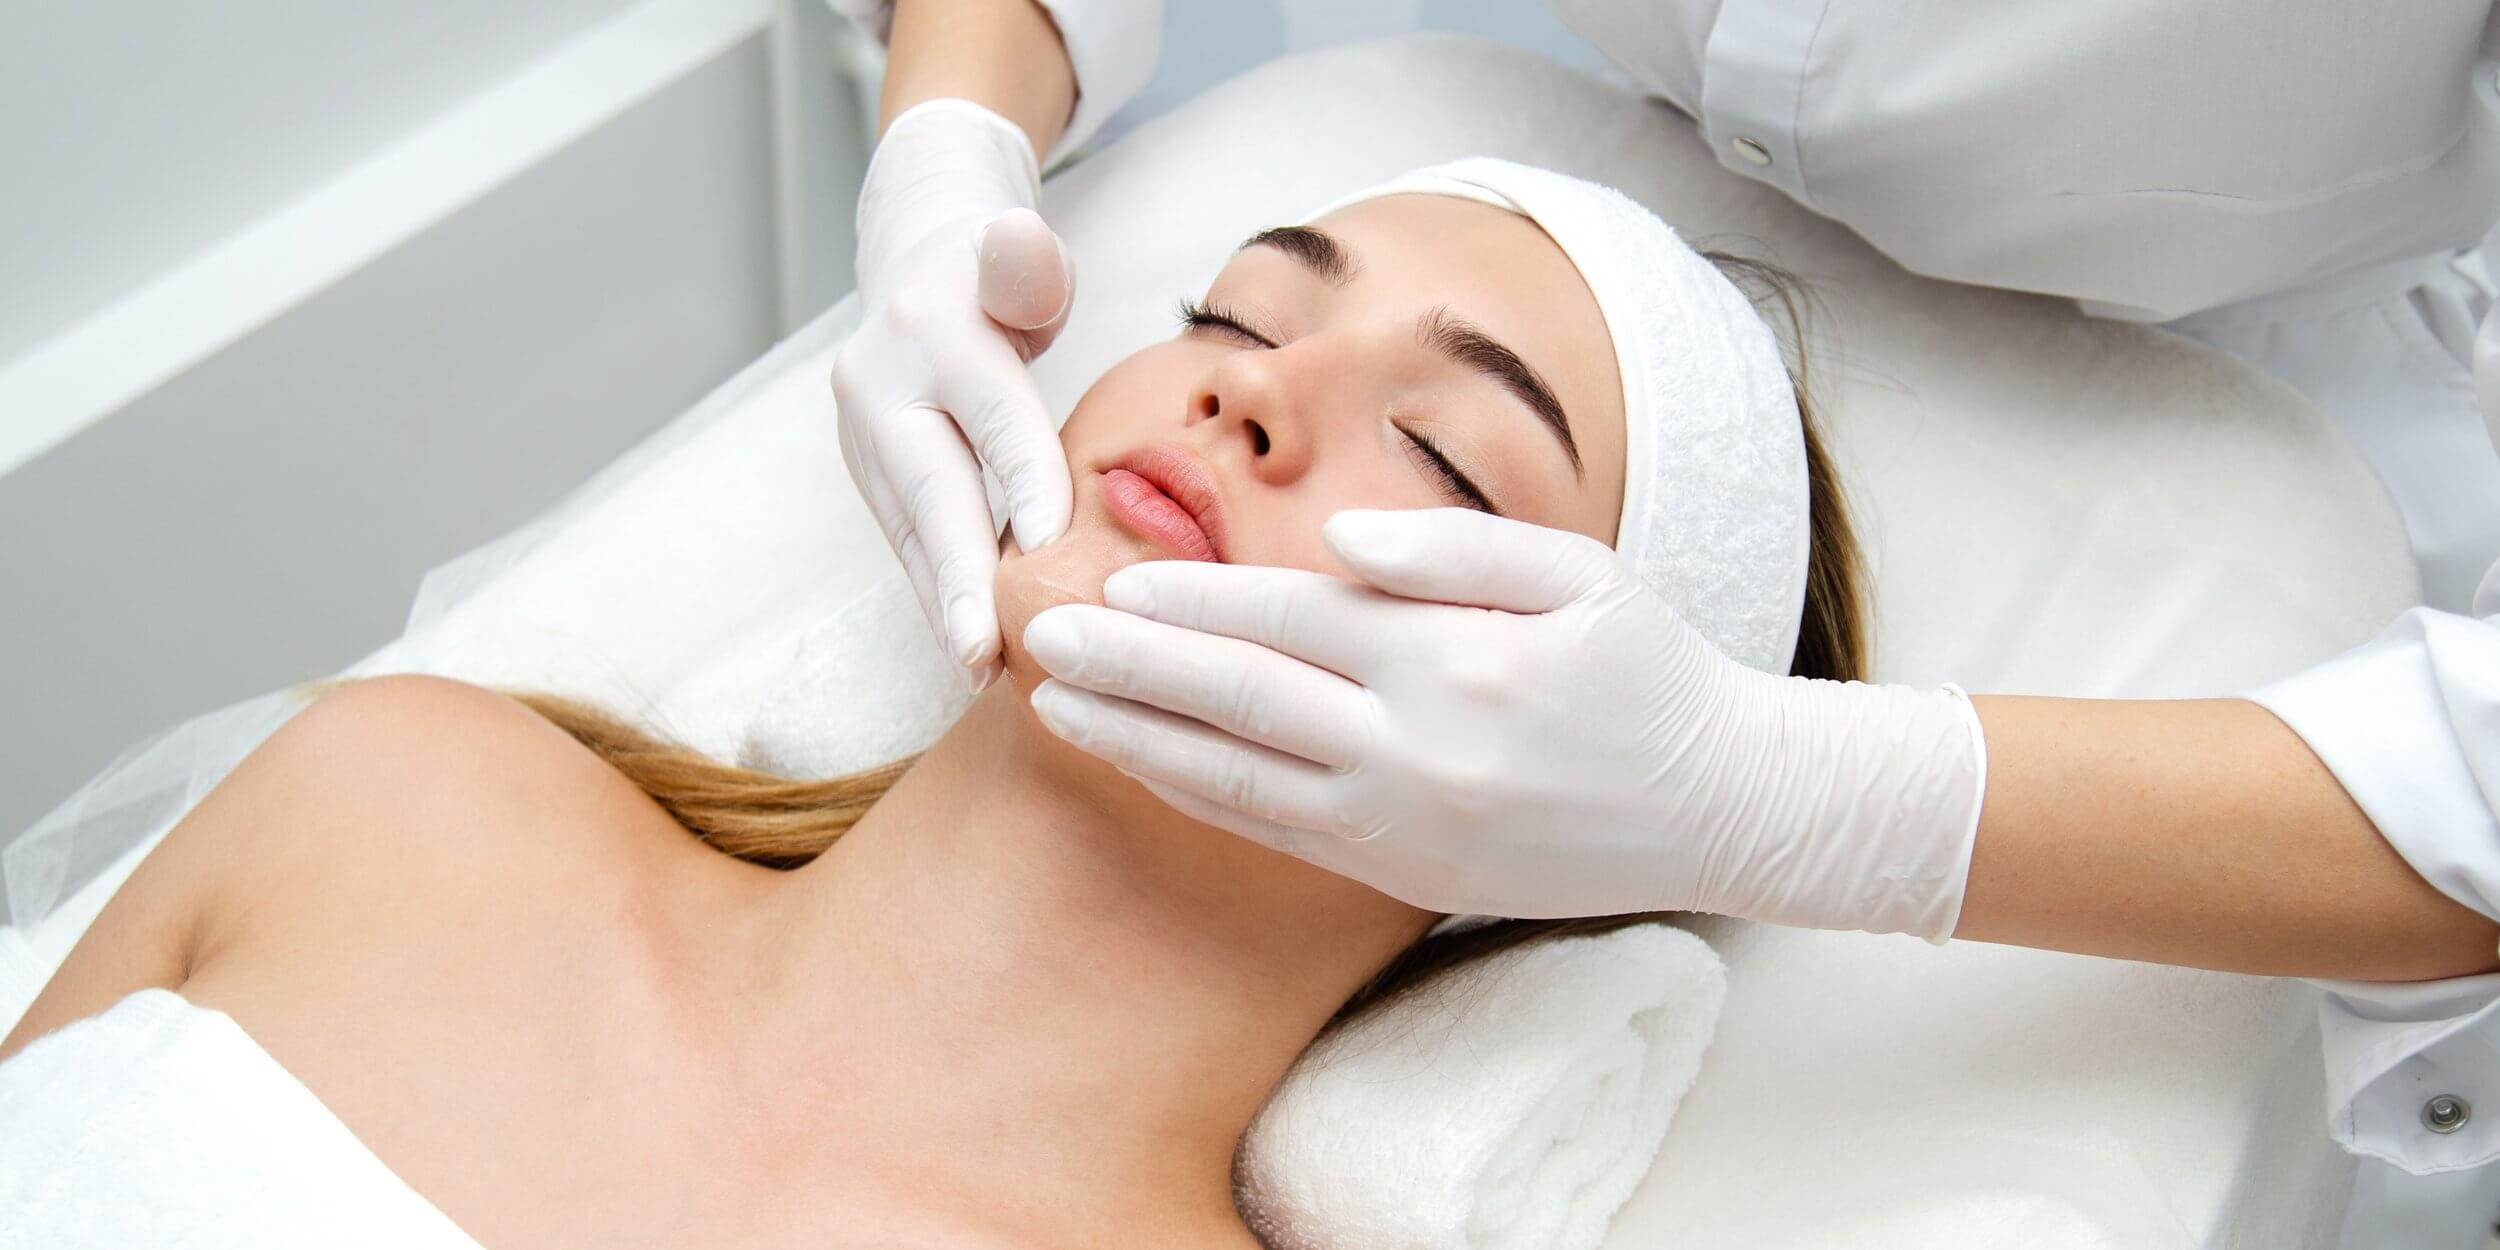 Global Medical Aesthetics Market Research Report 2022-2027